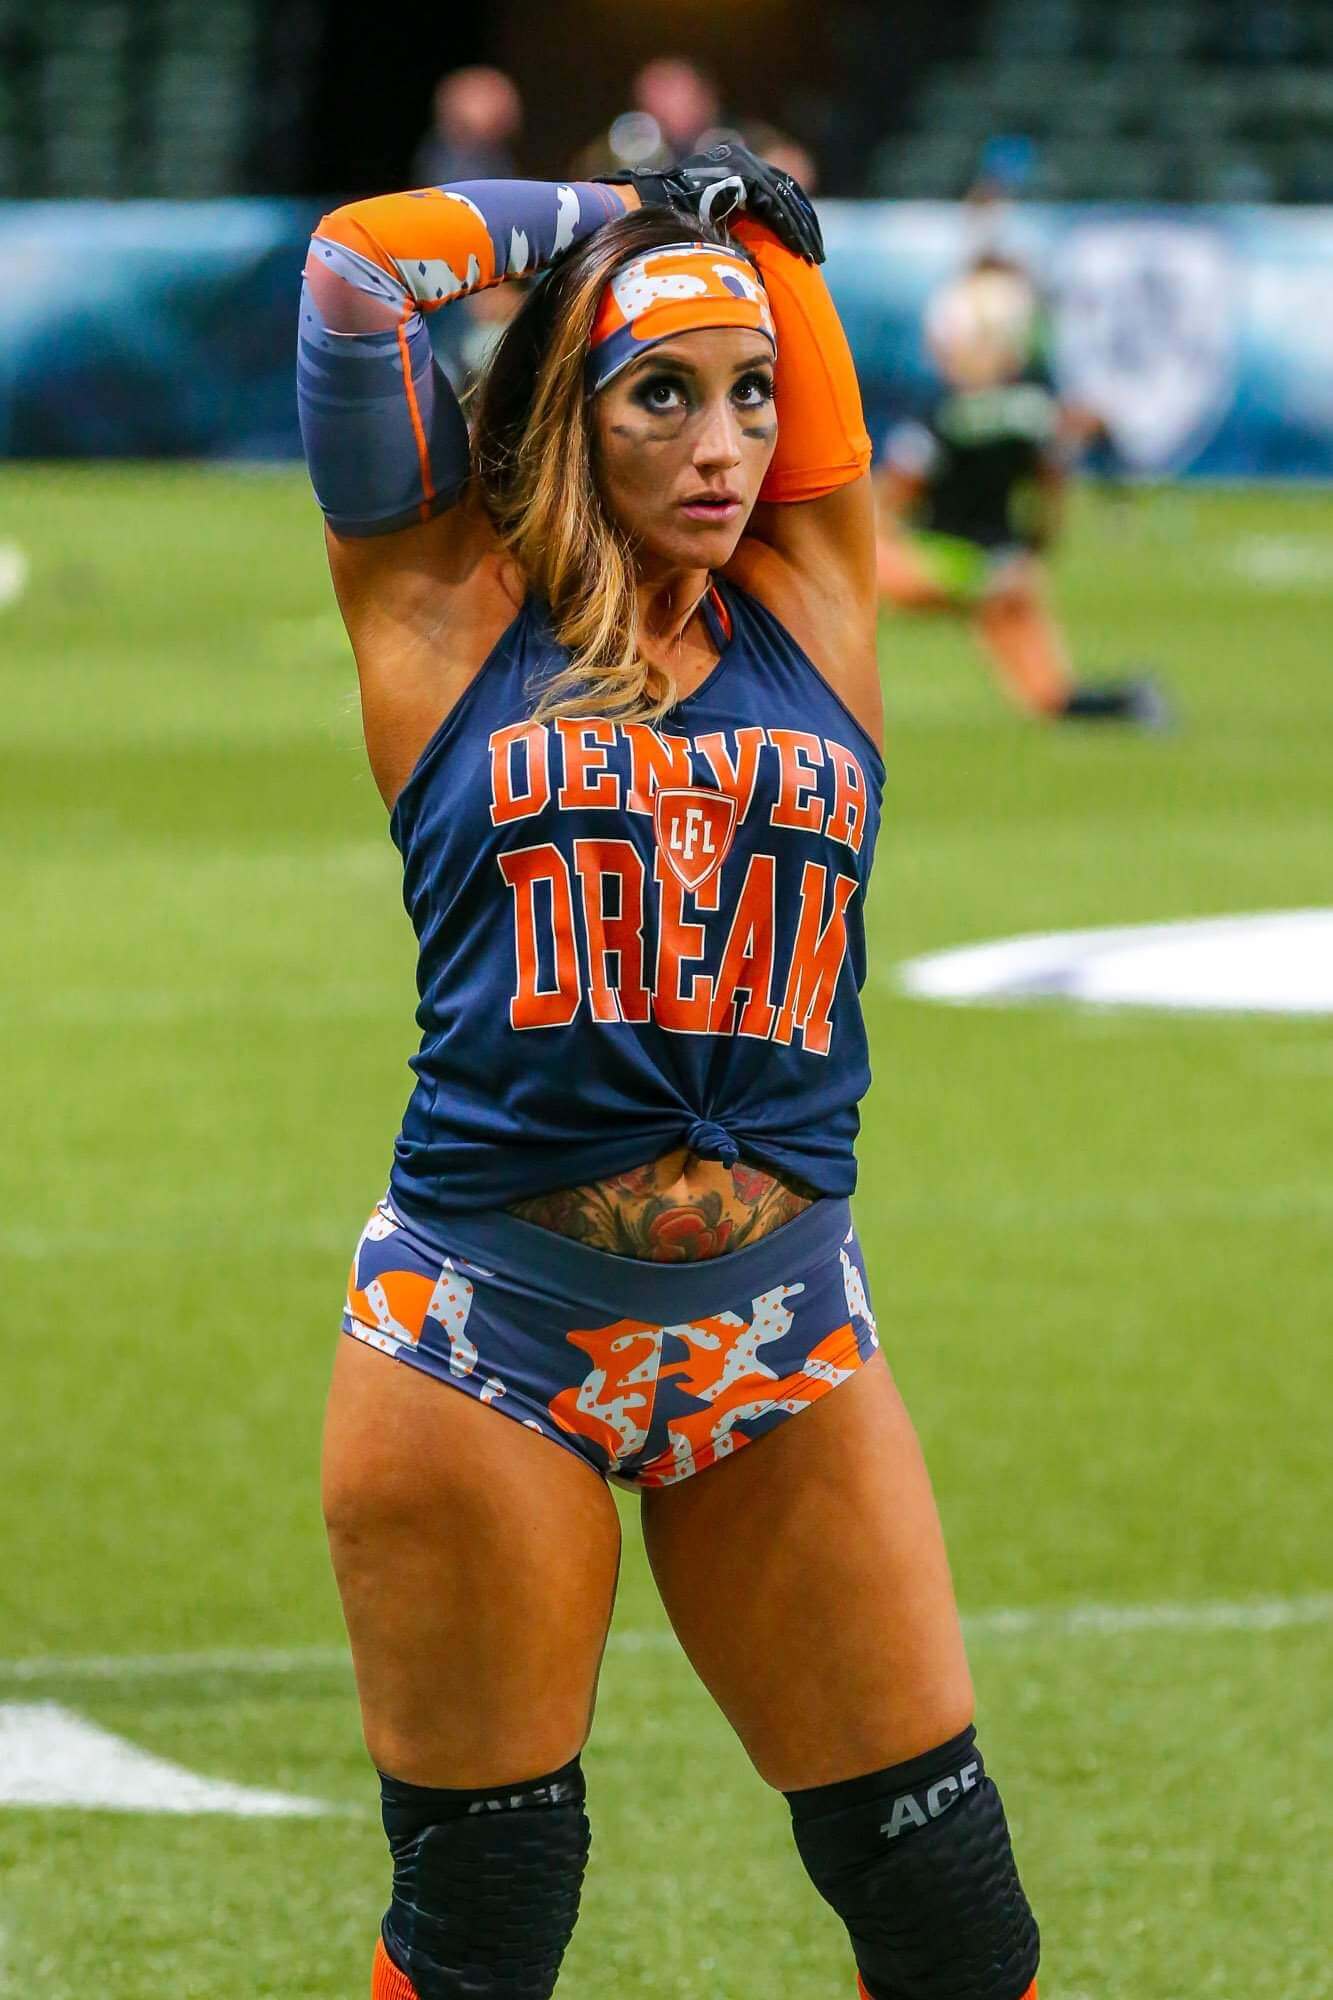 The Legends Football League Beautiful Women And Football, Need We Say Anymore! 149